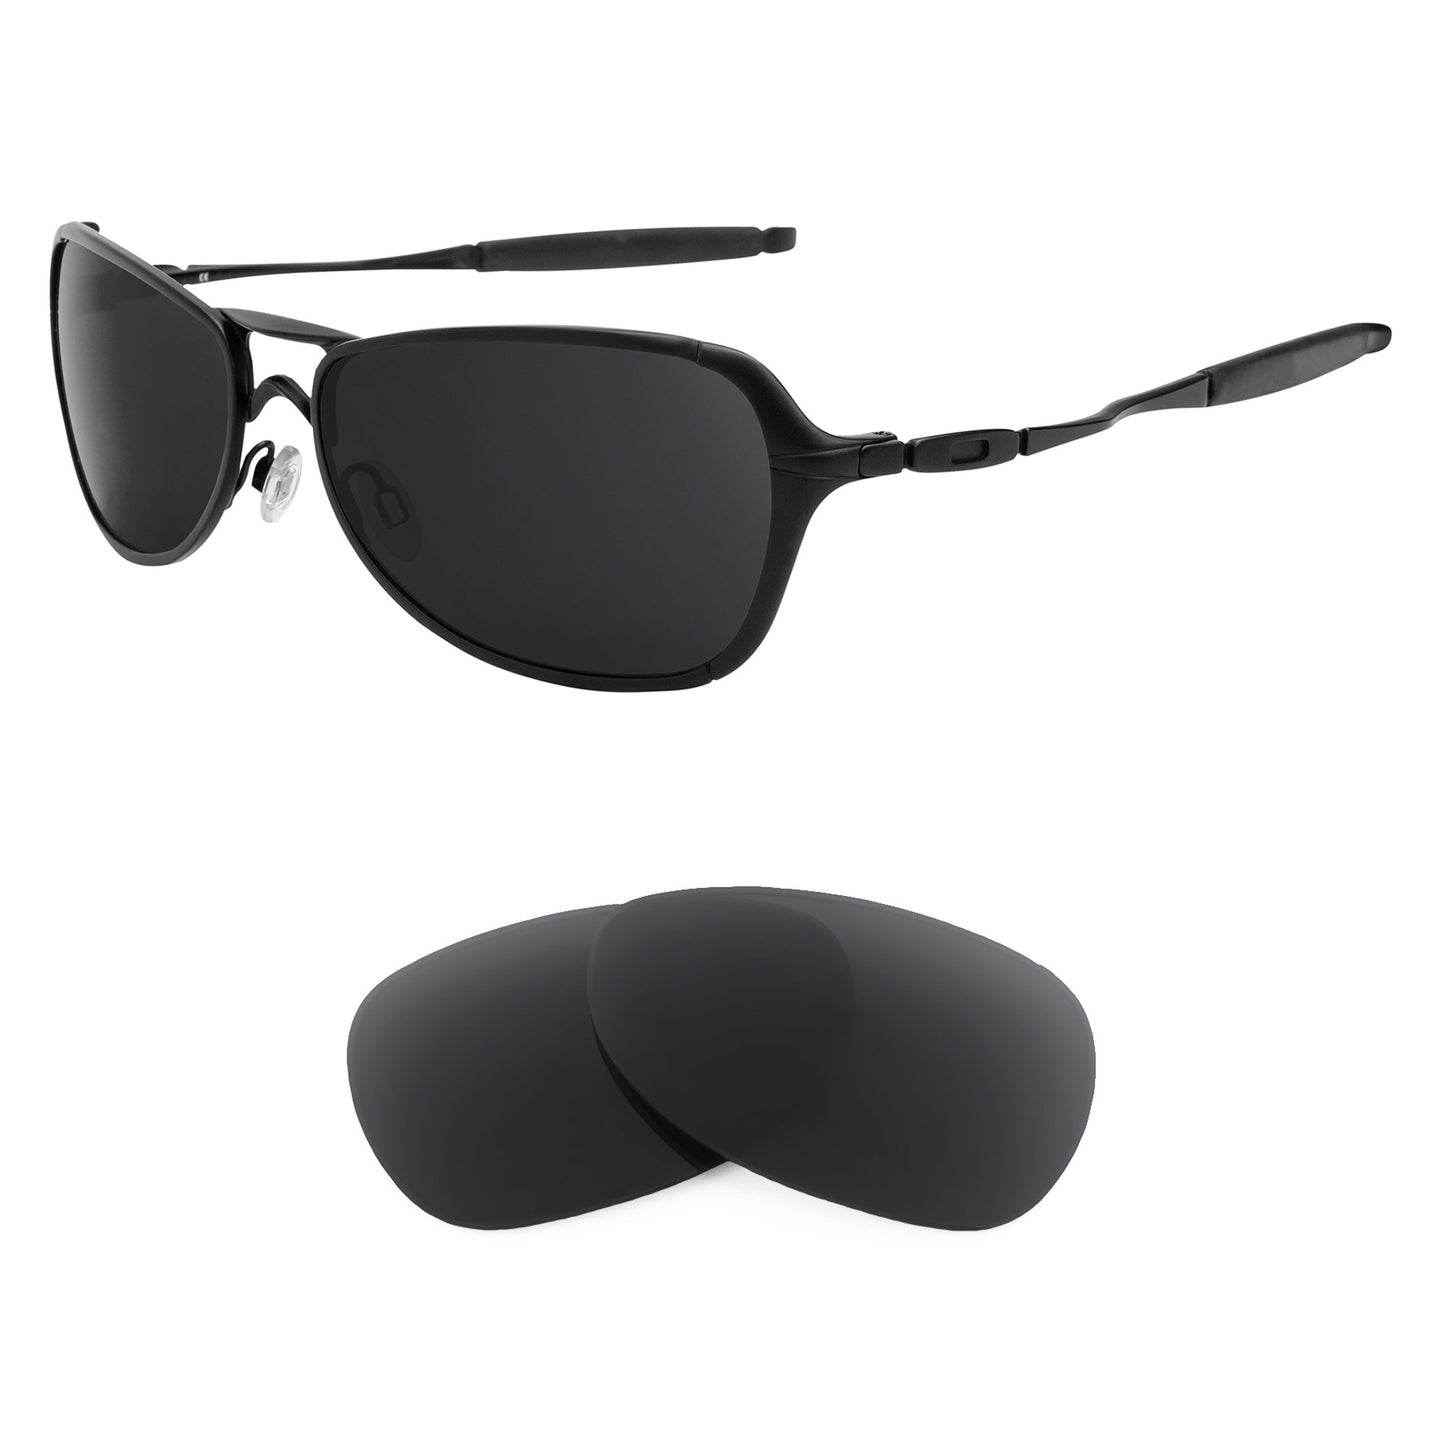 Oakley Felon sunglasses with replacement lenses